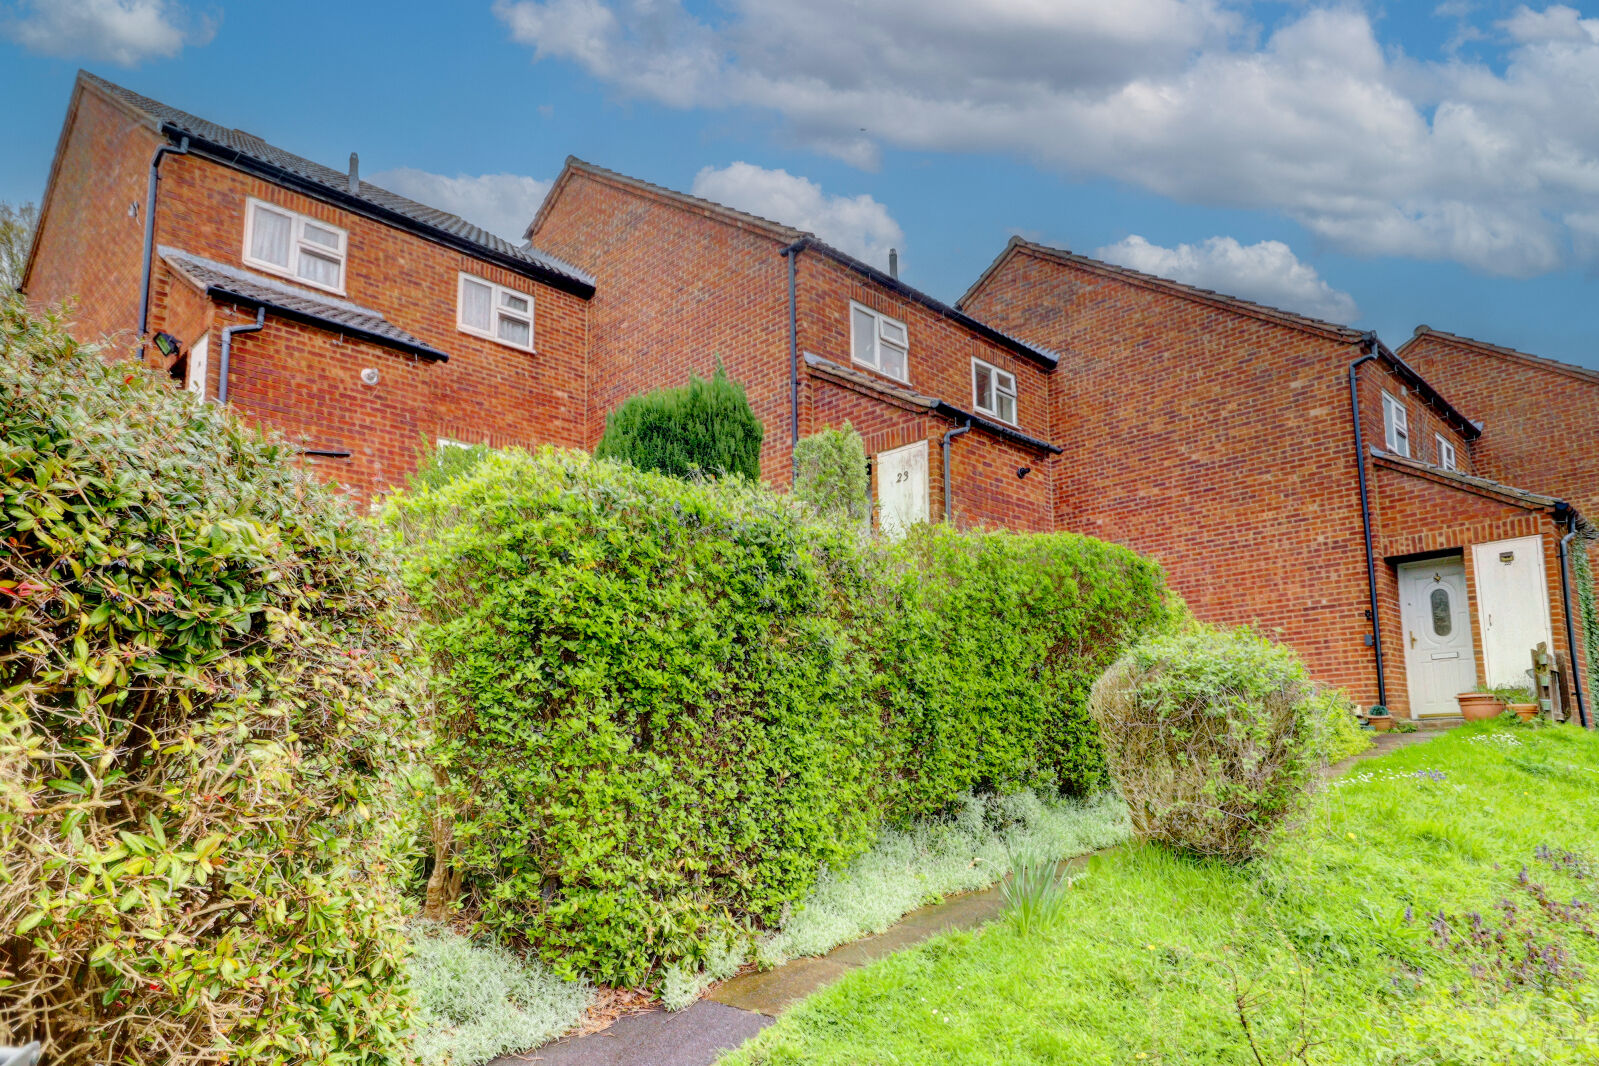 3 bedroom mid terraced house for sale Cumbrian Way, High Wycombe, HP13, main image